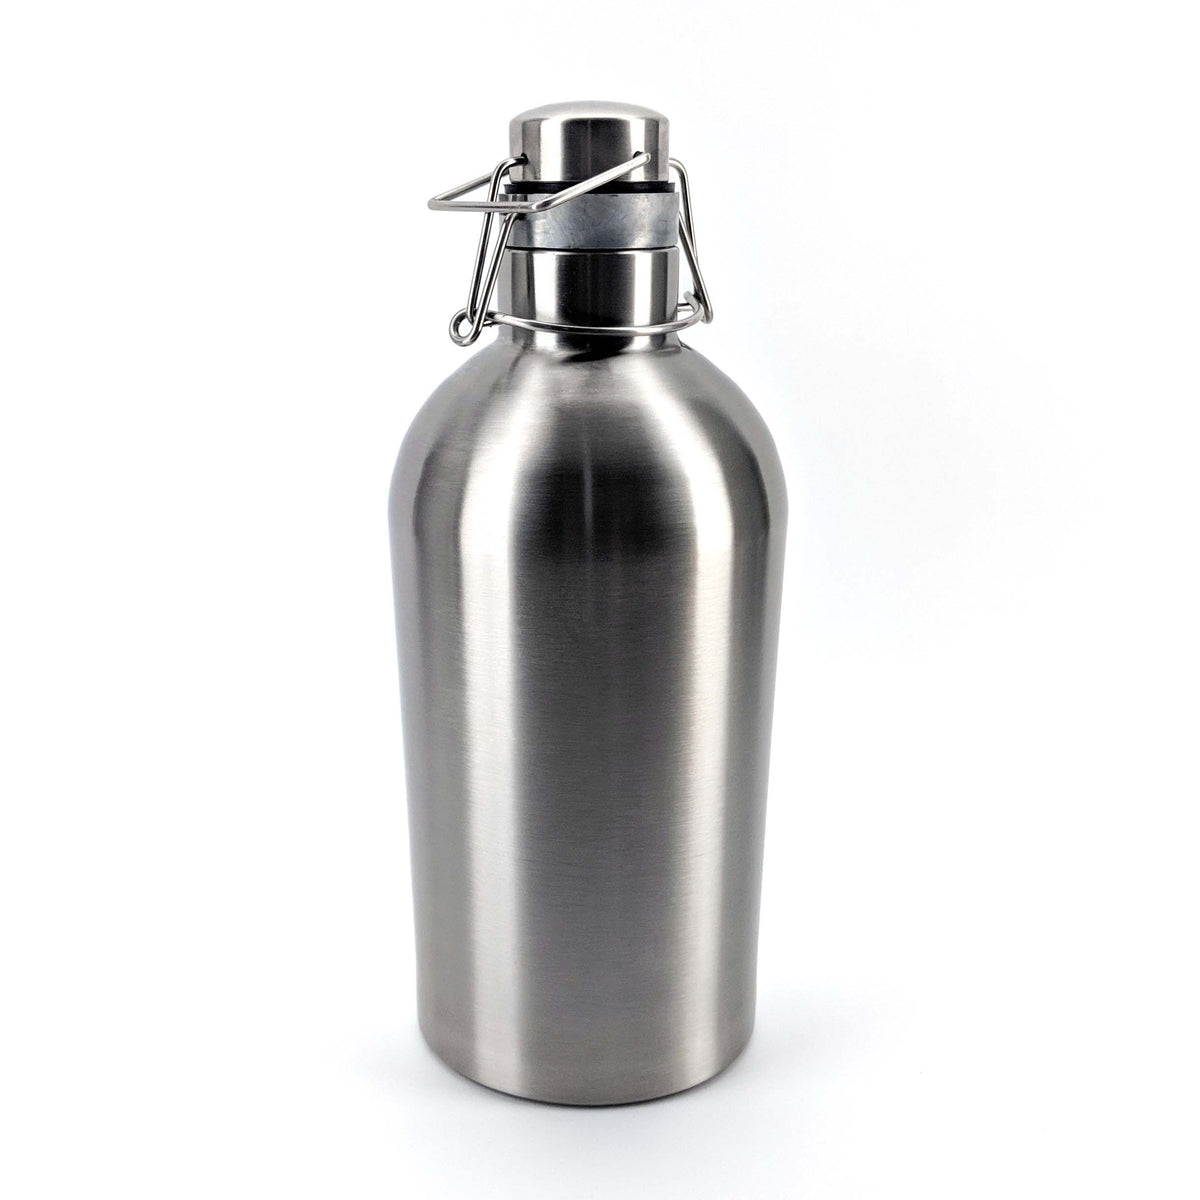 The Ultimate Beer Growler - All Things Fermented | Home Brew Shop NZ | Supplies | Equipment